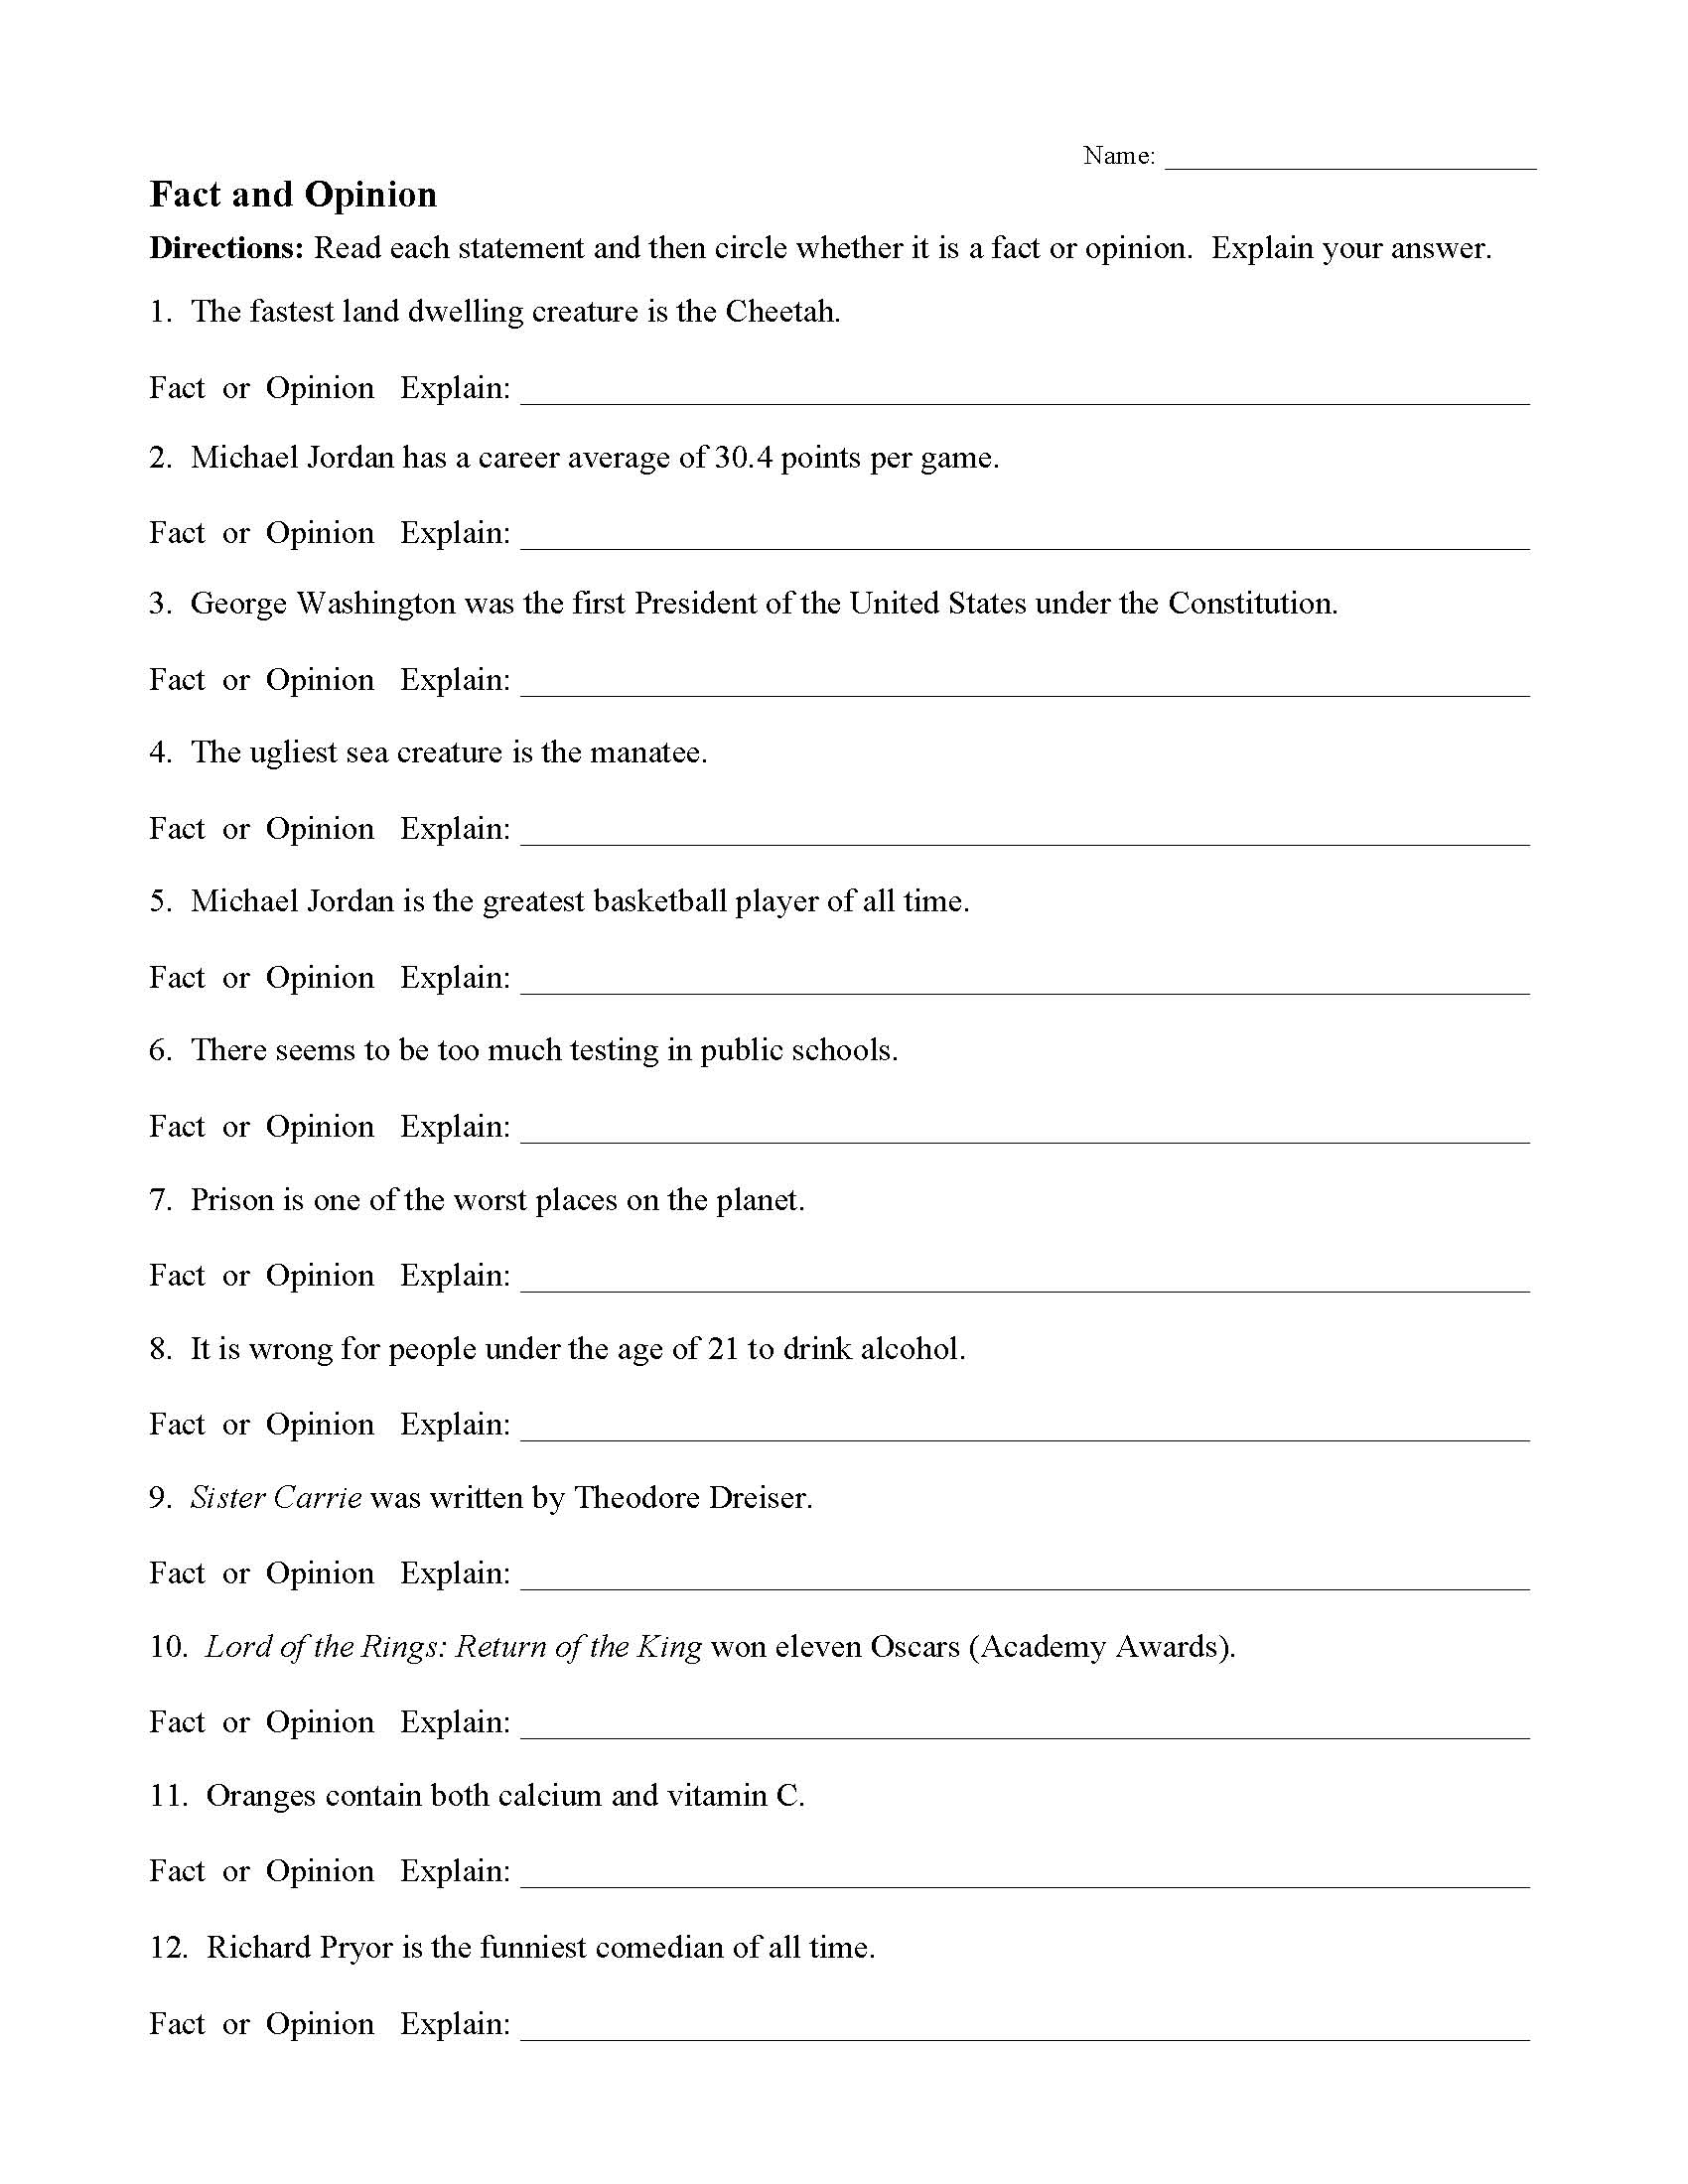 fact-and-opinion-worksheets-85d